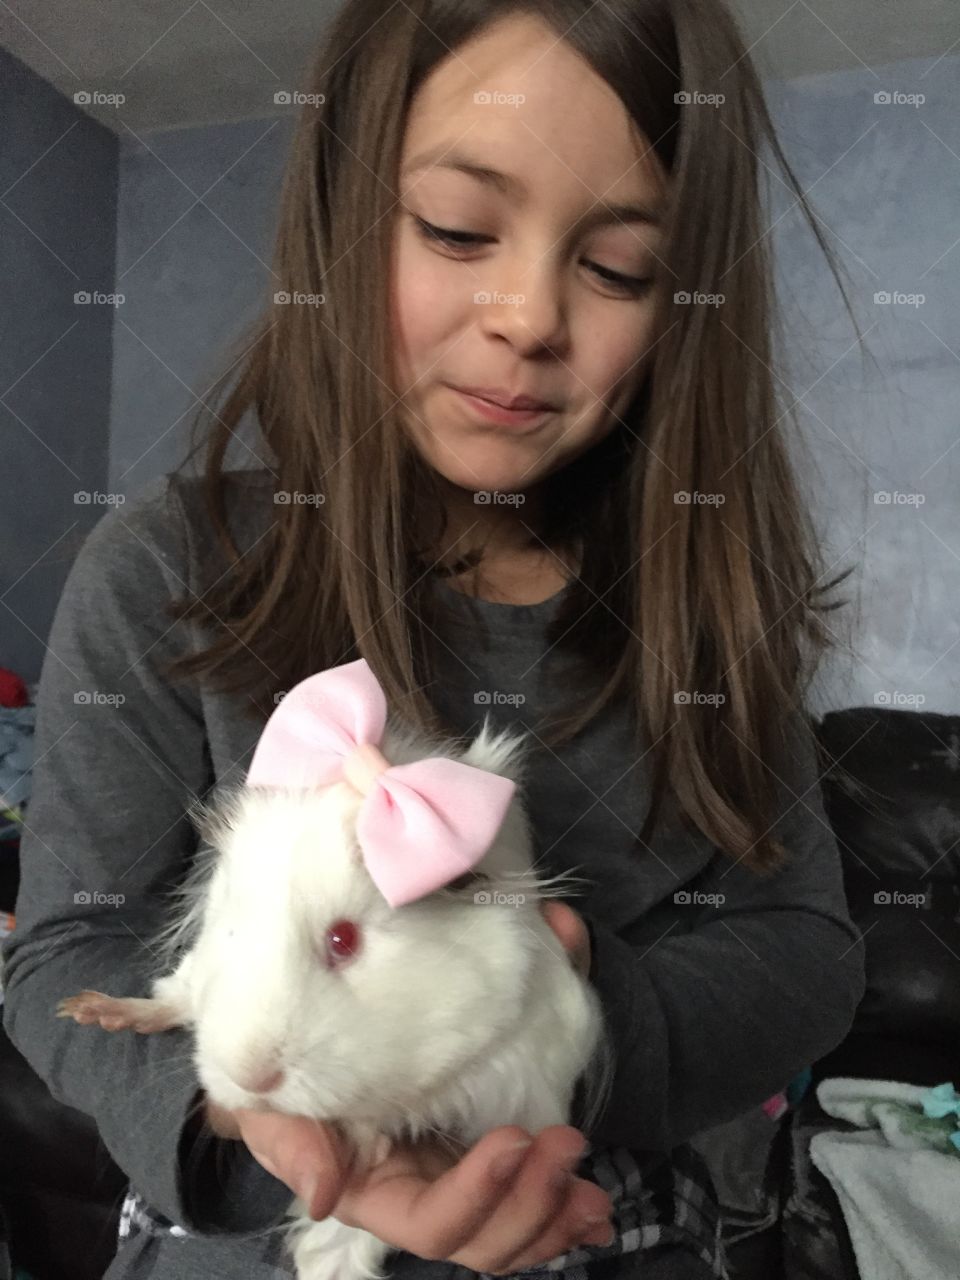 A girl and her piggy